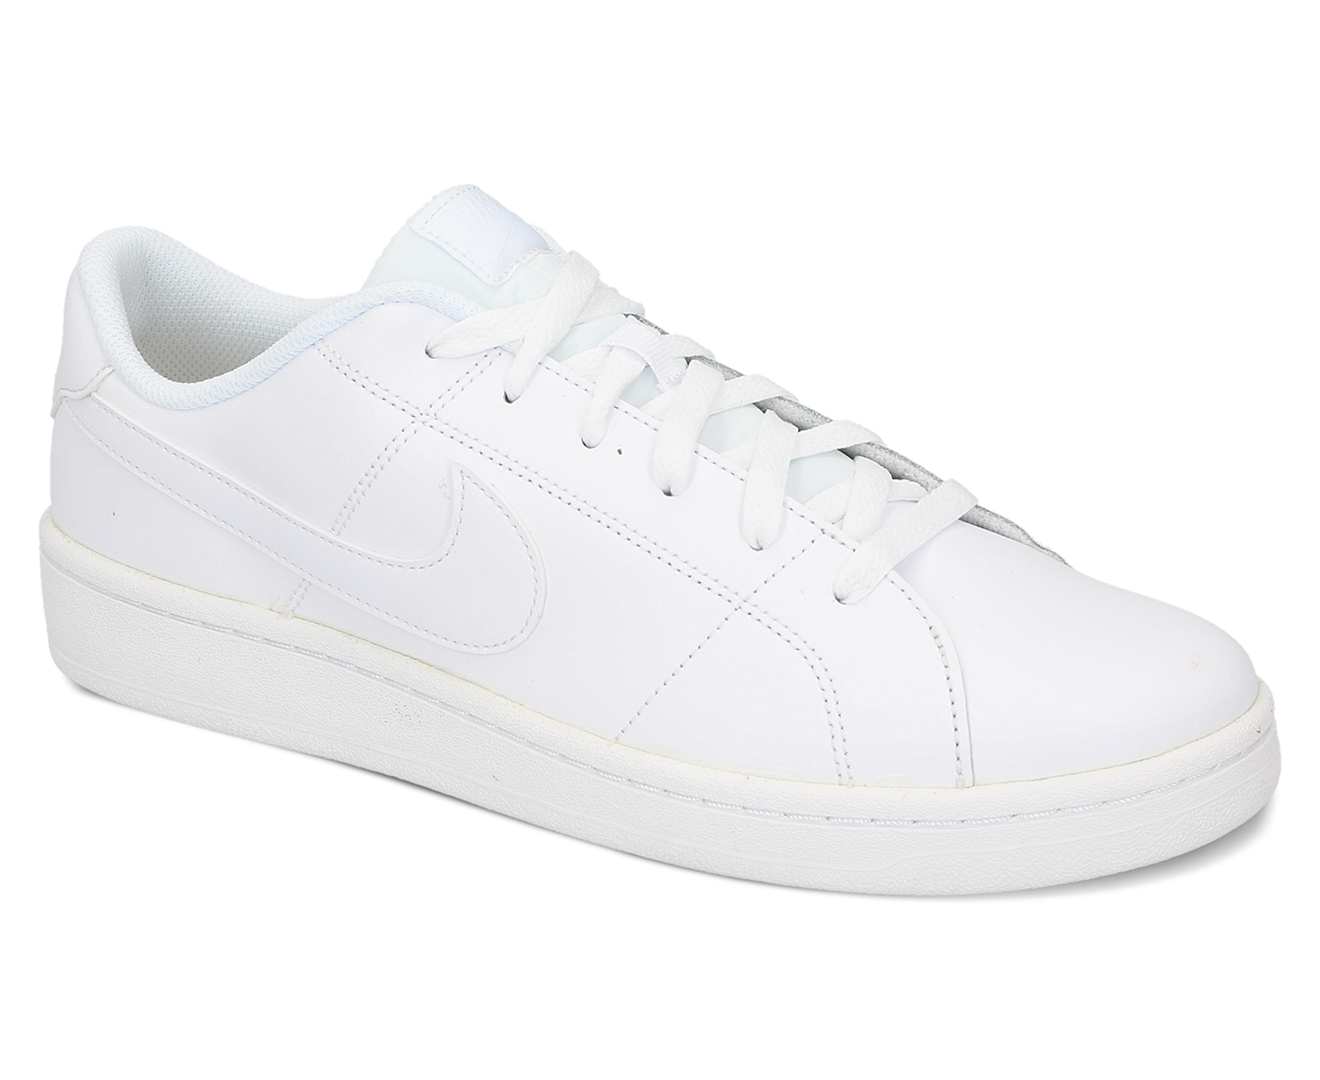 Nike Men's Court Royale 2 Sneakers - White | Catch.co.nz